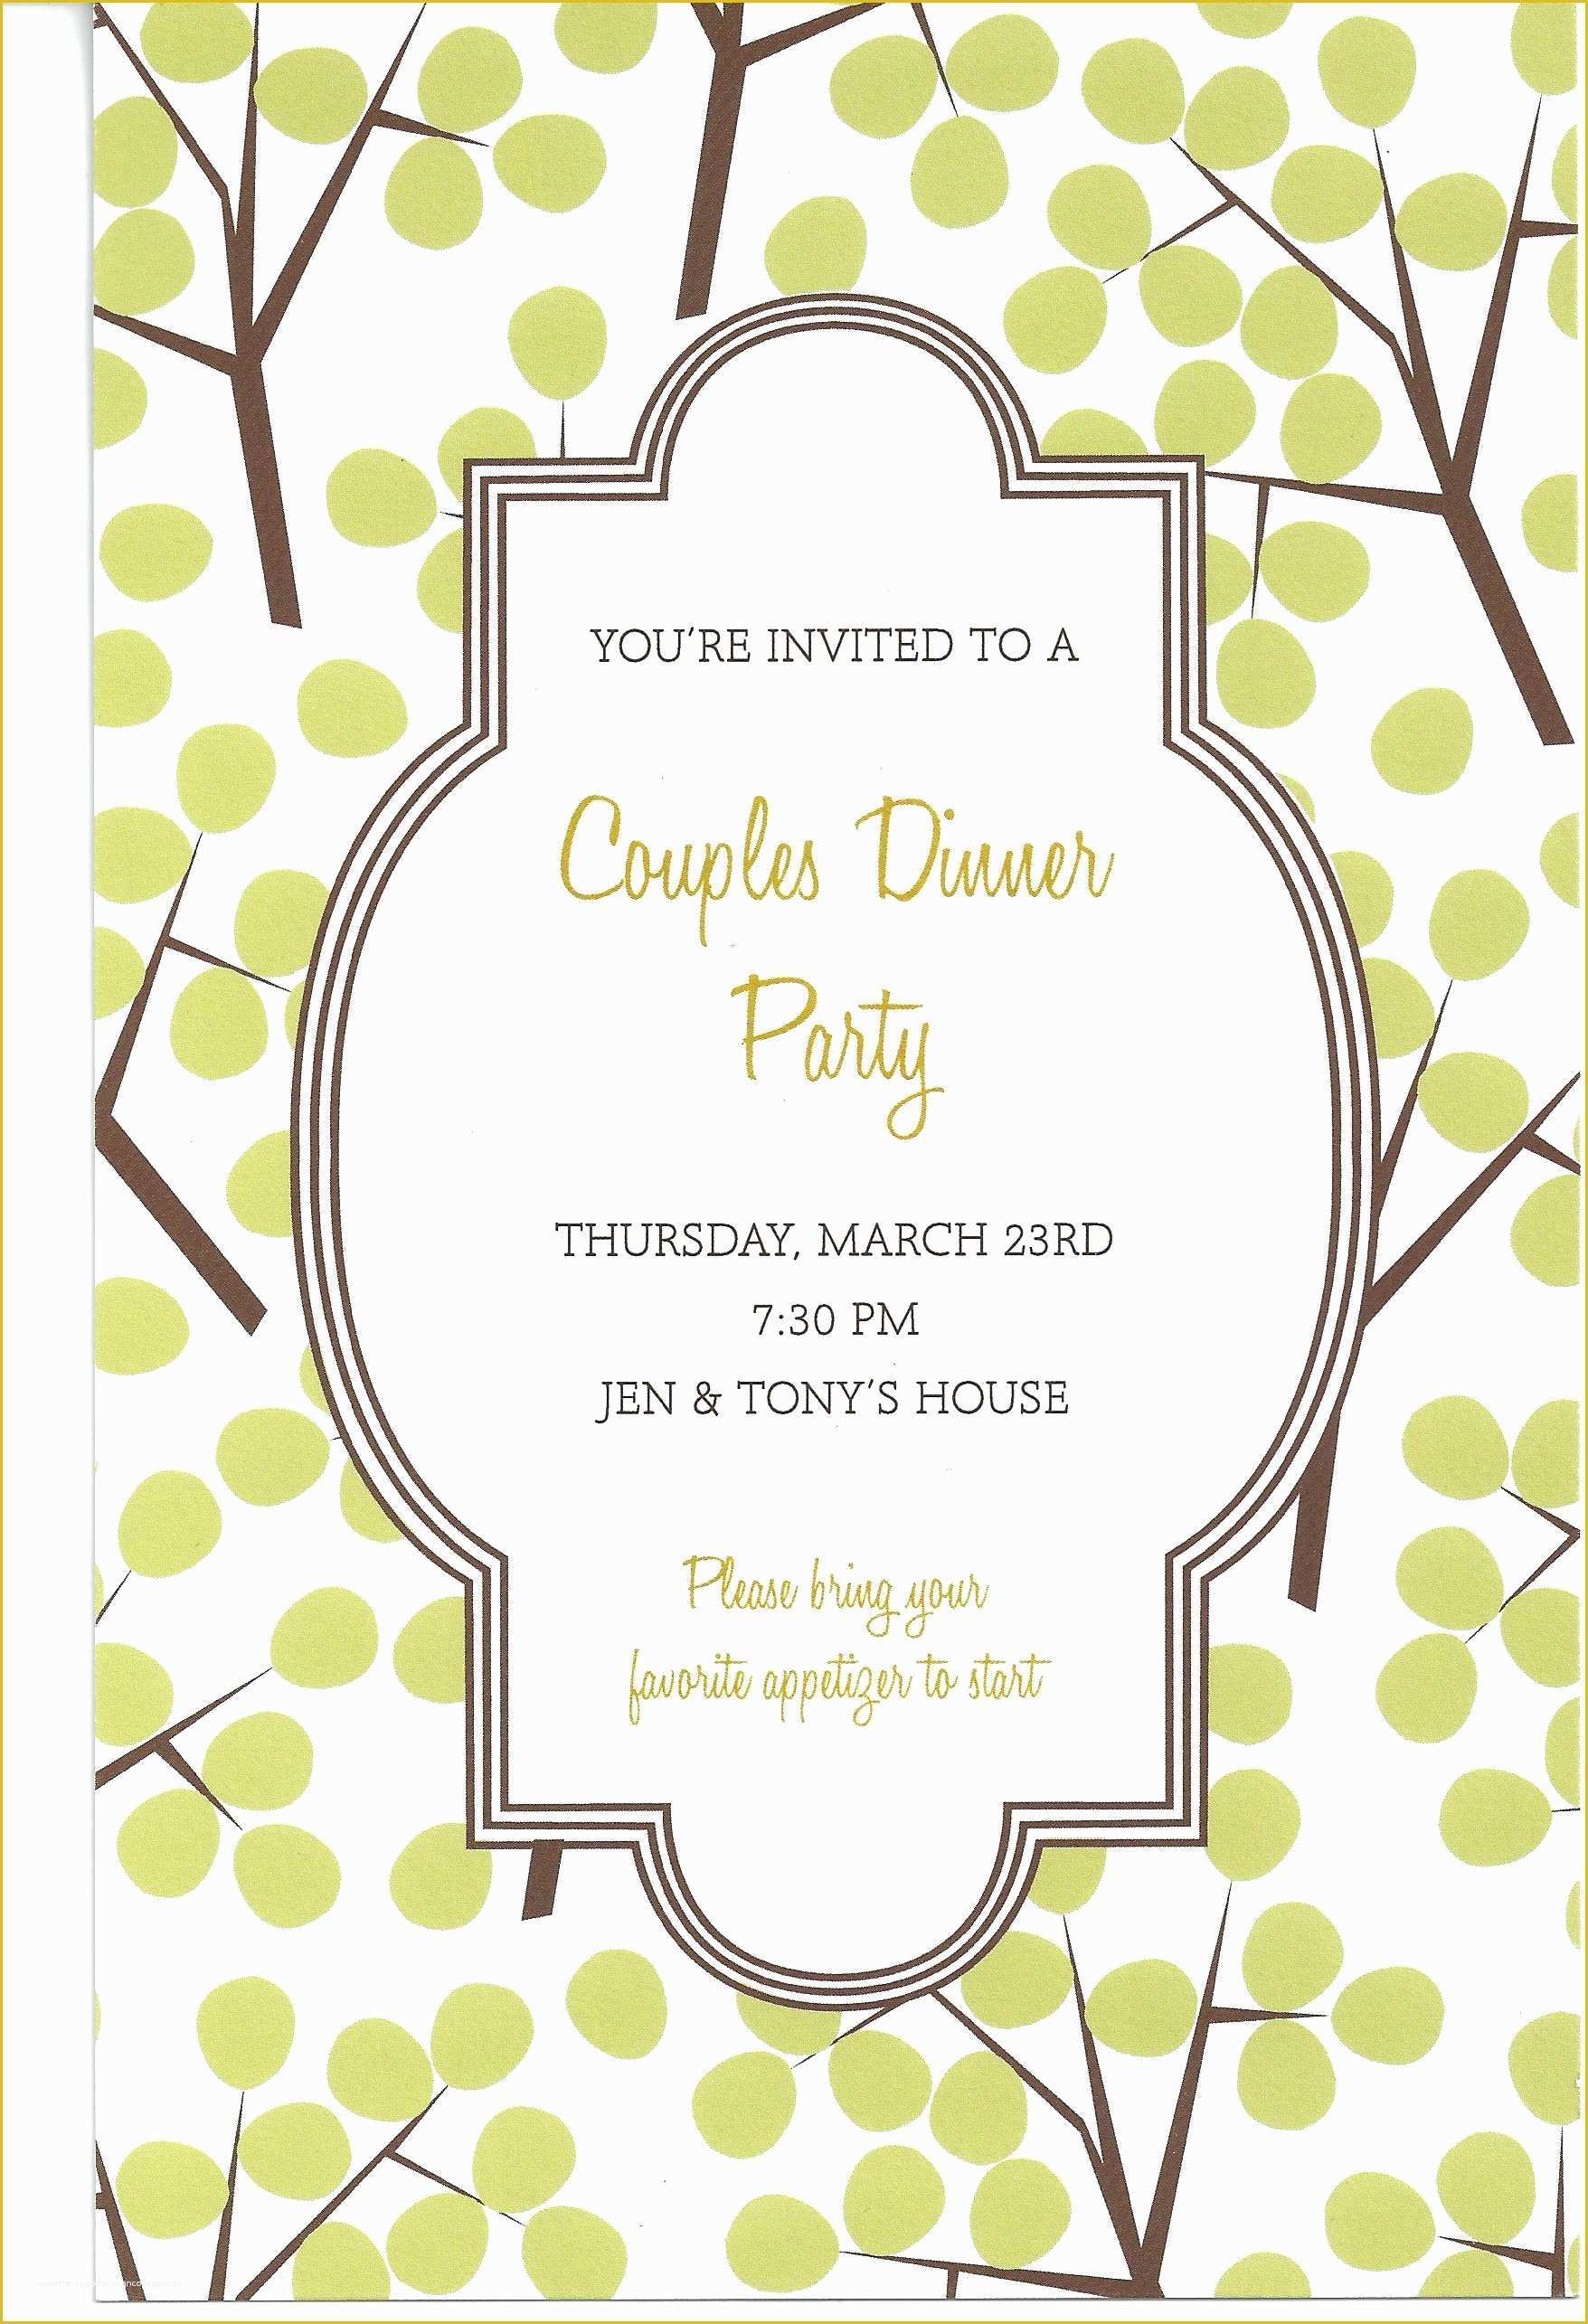 Dinner Party Invitation Templates Free Download Of Rehearsal Dinner Invitations Templates Free